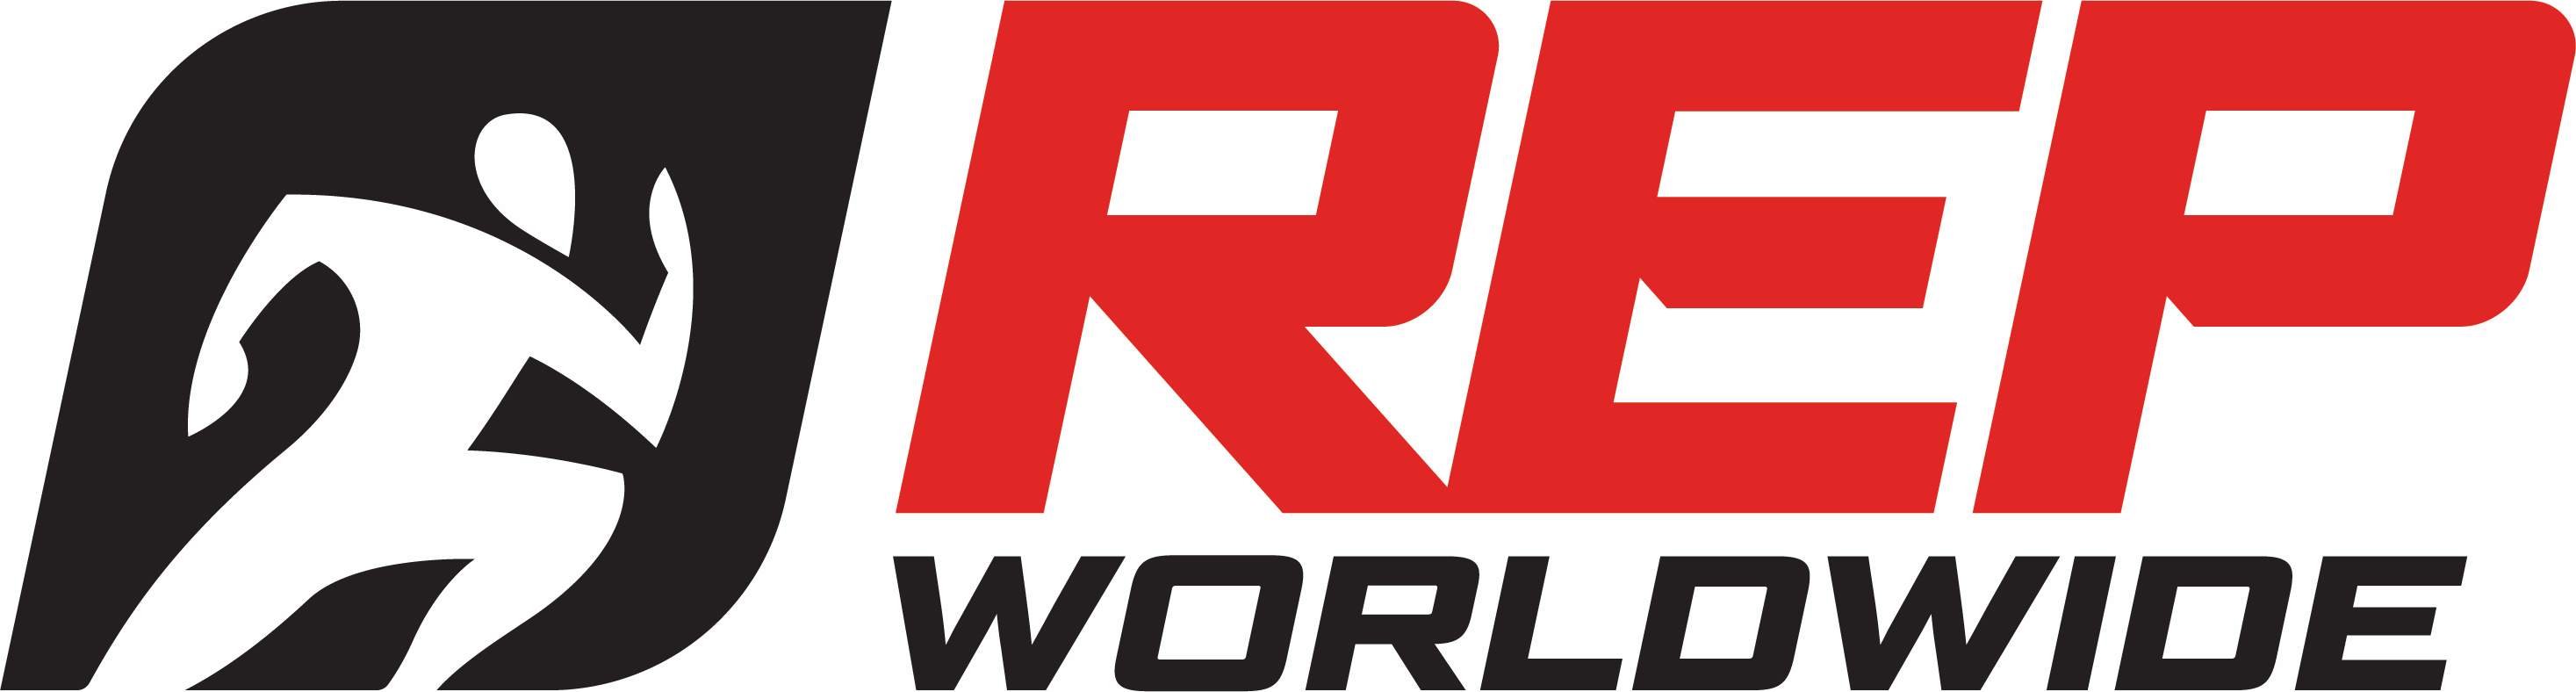 Nfl Players Inc Rep Worldwide Launches As Full Service